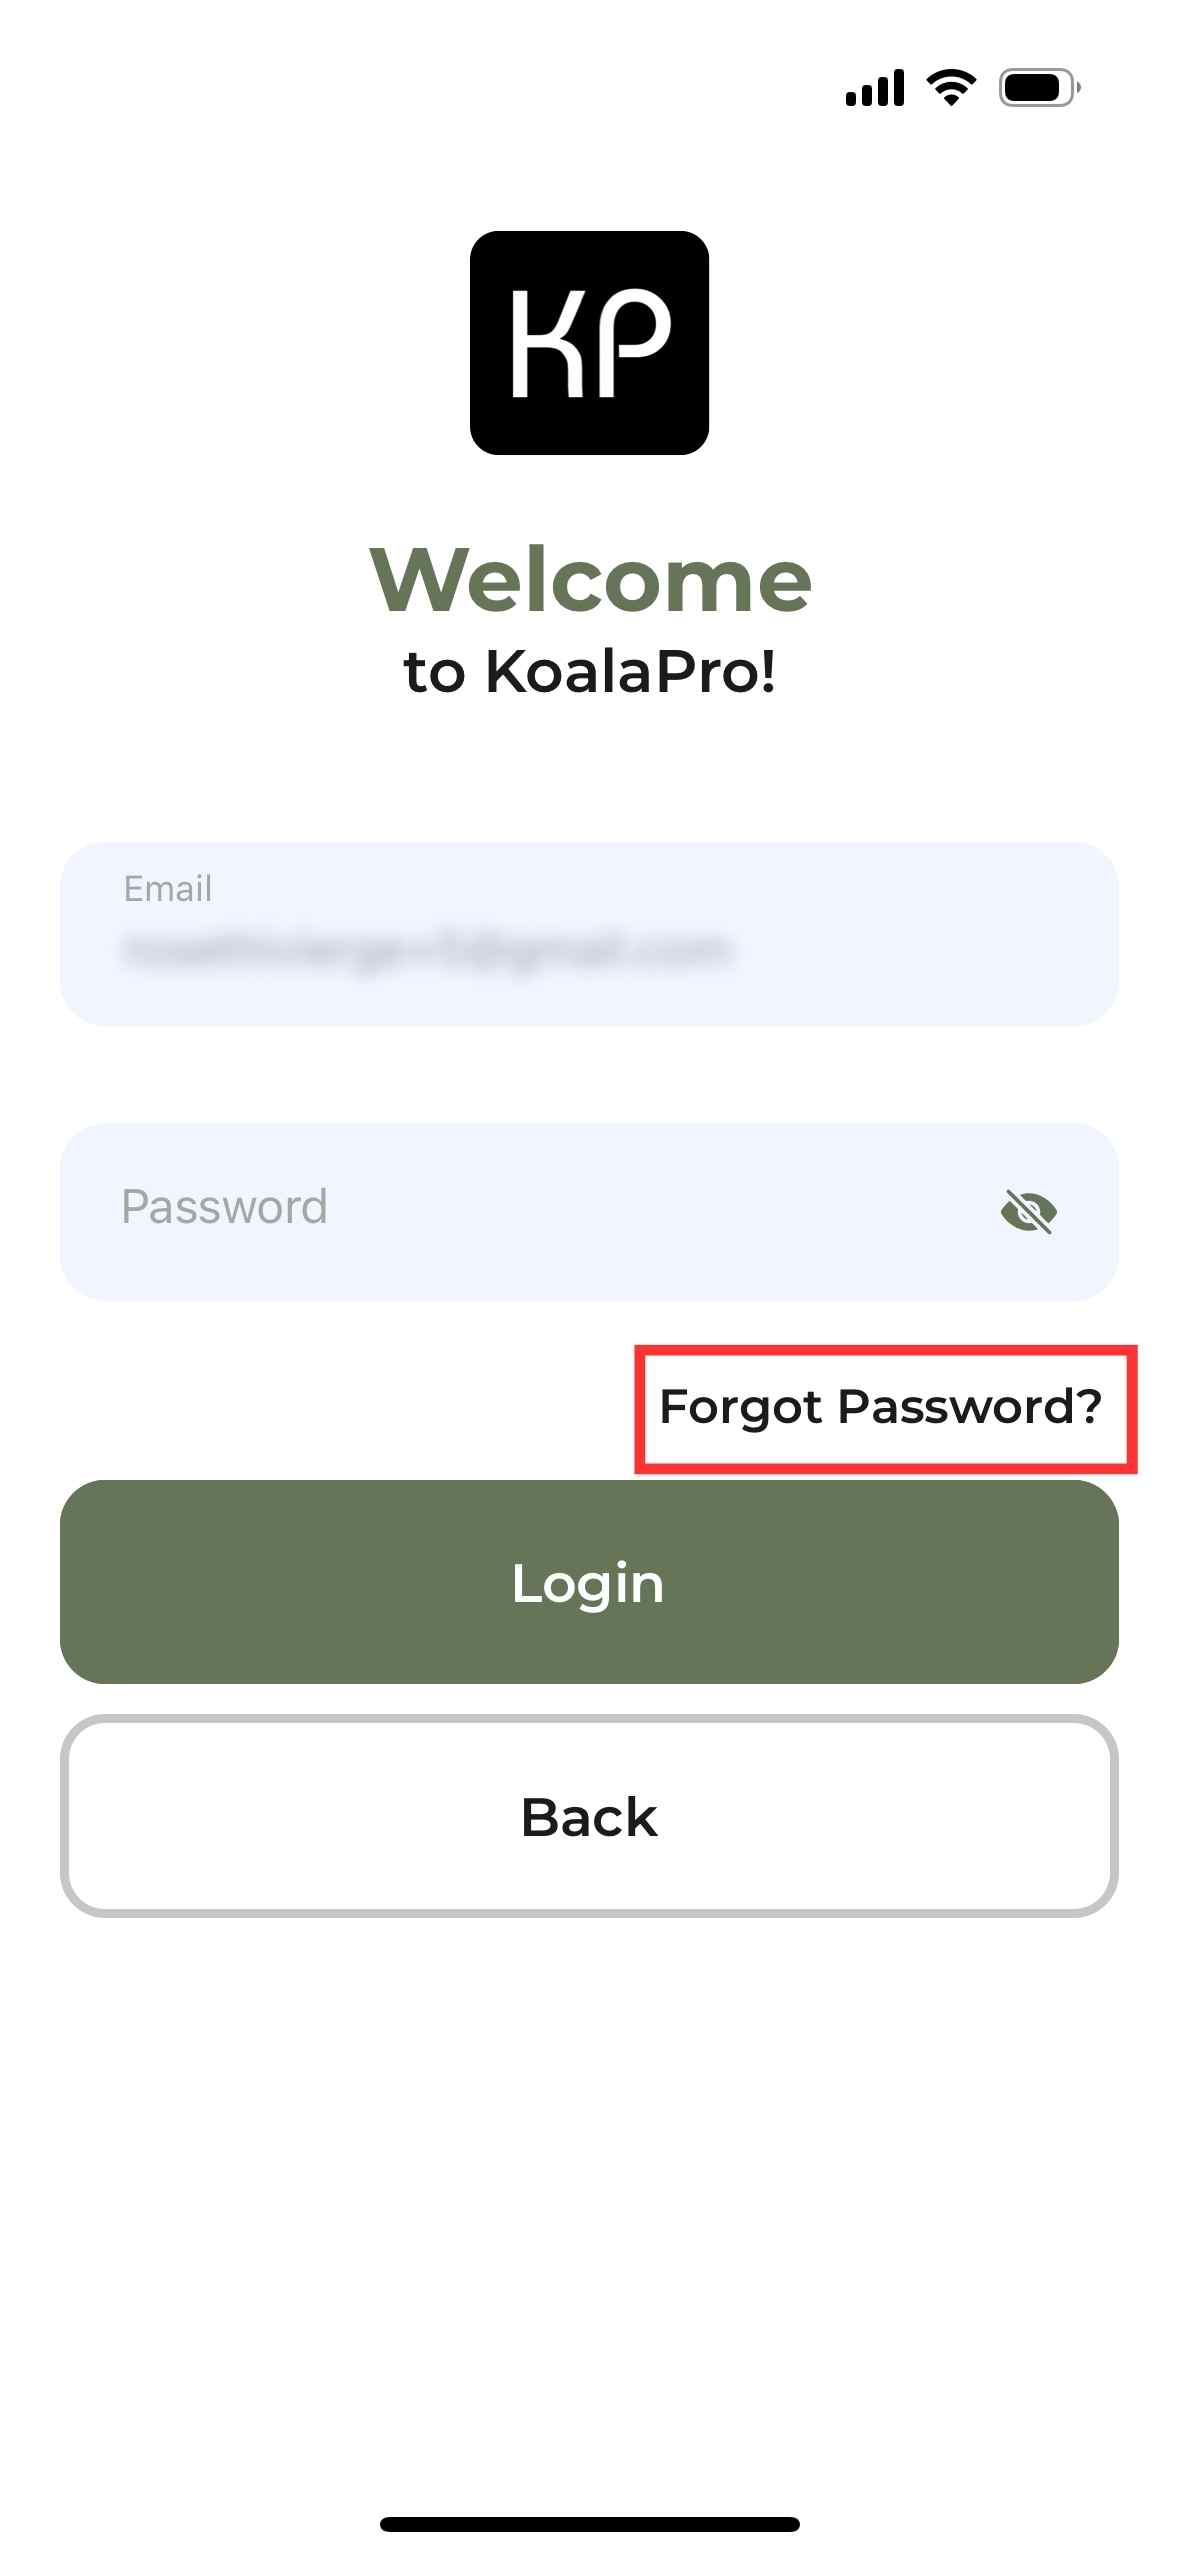 What should I do if I have forgotten my password?